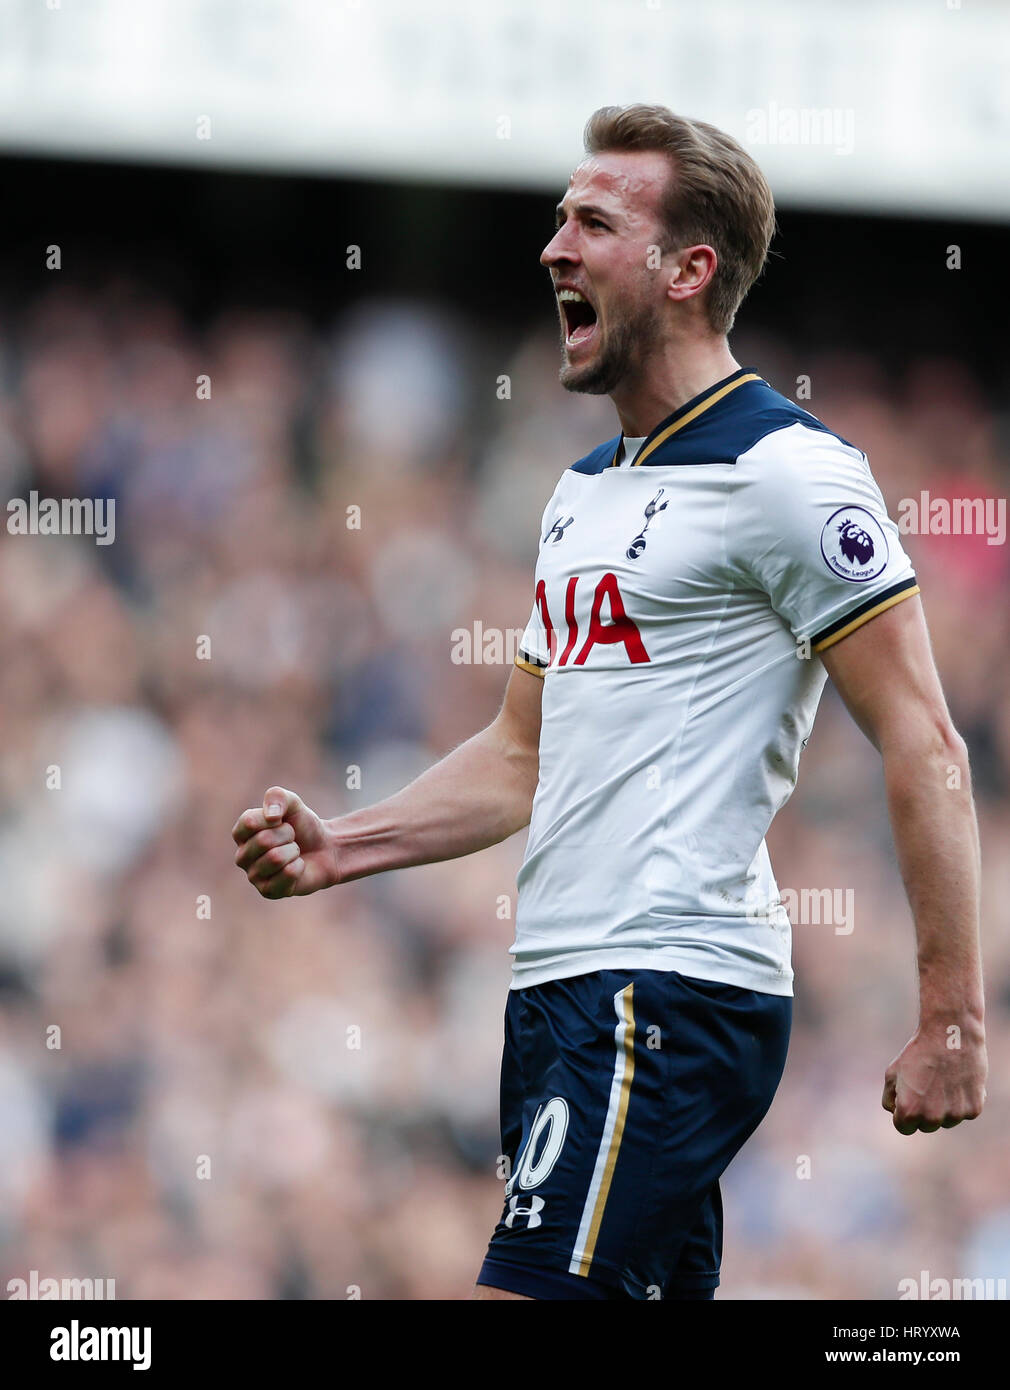 London, Britain. 5th Mar, 2017. Harry Kane of Tottenham Hotspur celebrates after scoring during the English Premier League match between Tottenham Hotspur and Everton at White Hart Lane Stadium in London, Britain, on March 5, 2017. Credit: Han Yan/Xinhua/Alamy Live News Stock Photo